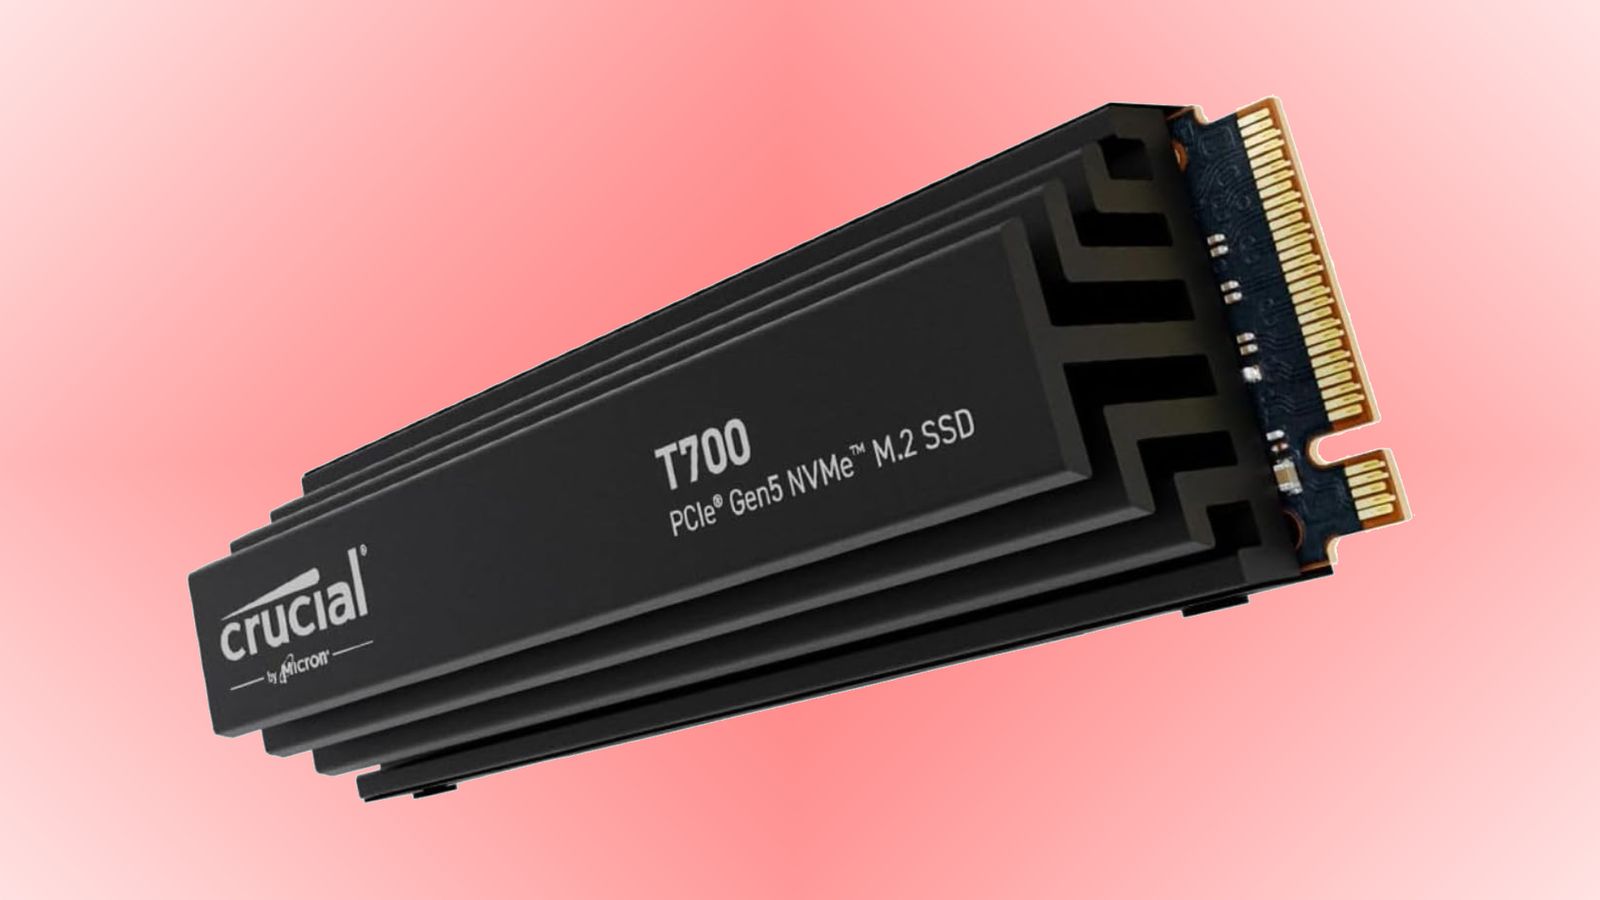 Crucial T700 product image of a black SSD with white branding and gold connections.